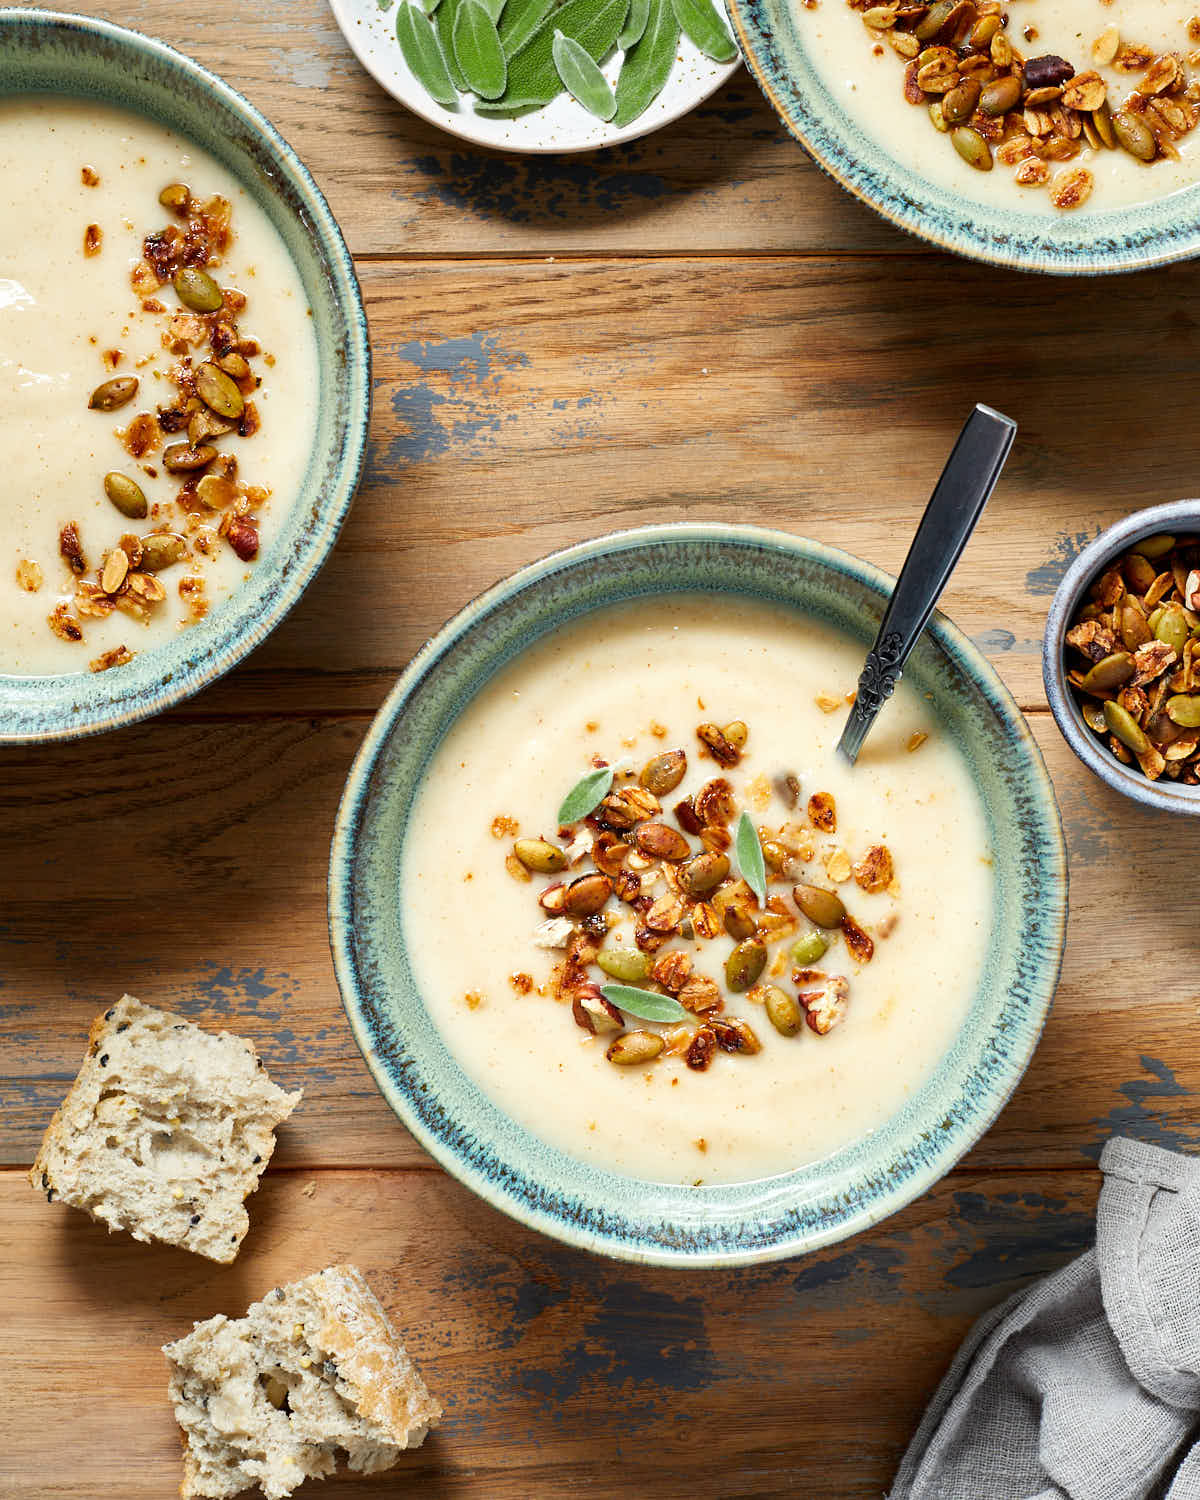 Parsnip and pear soup in green bowls with savoury granola on top.